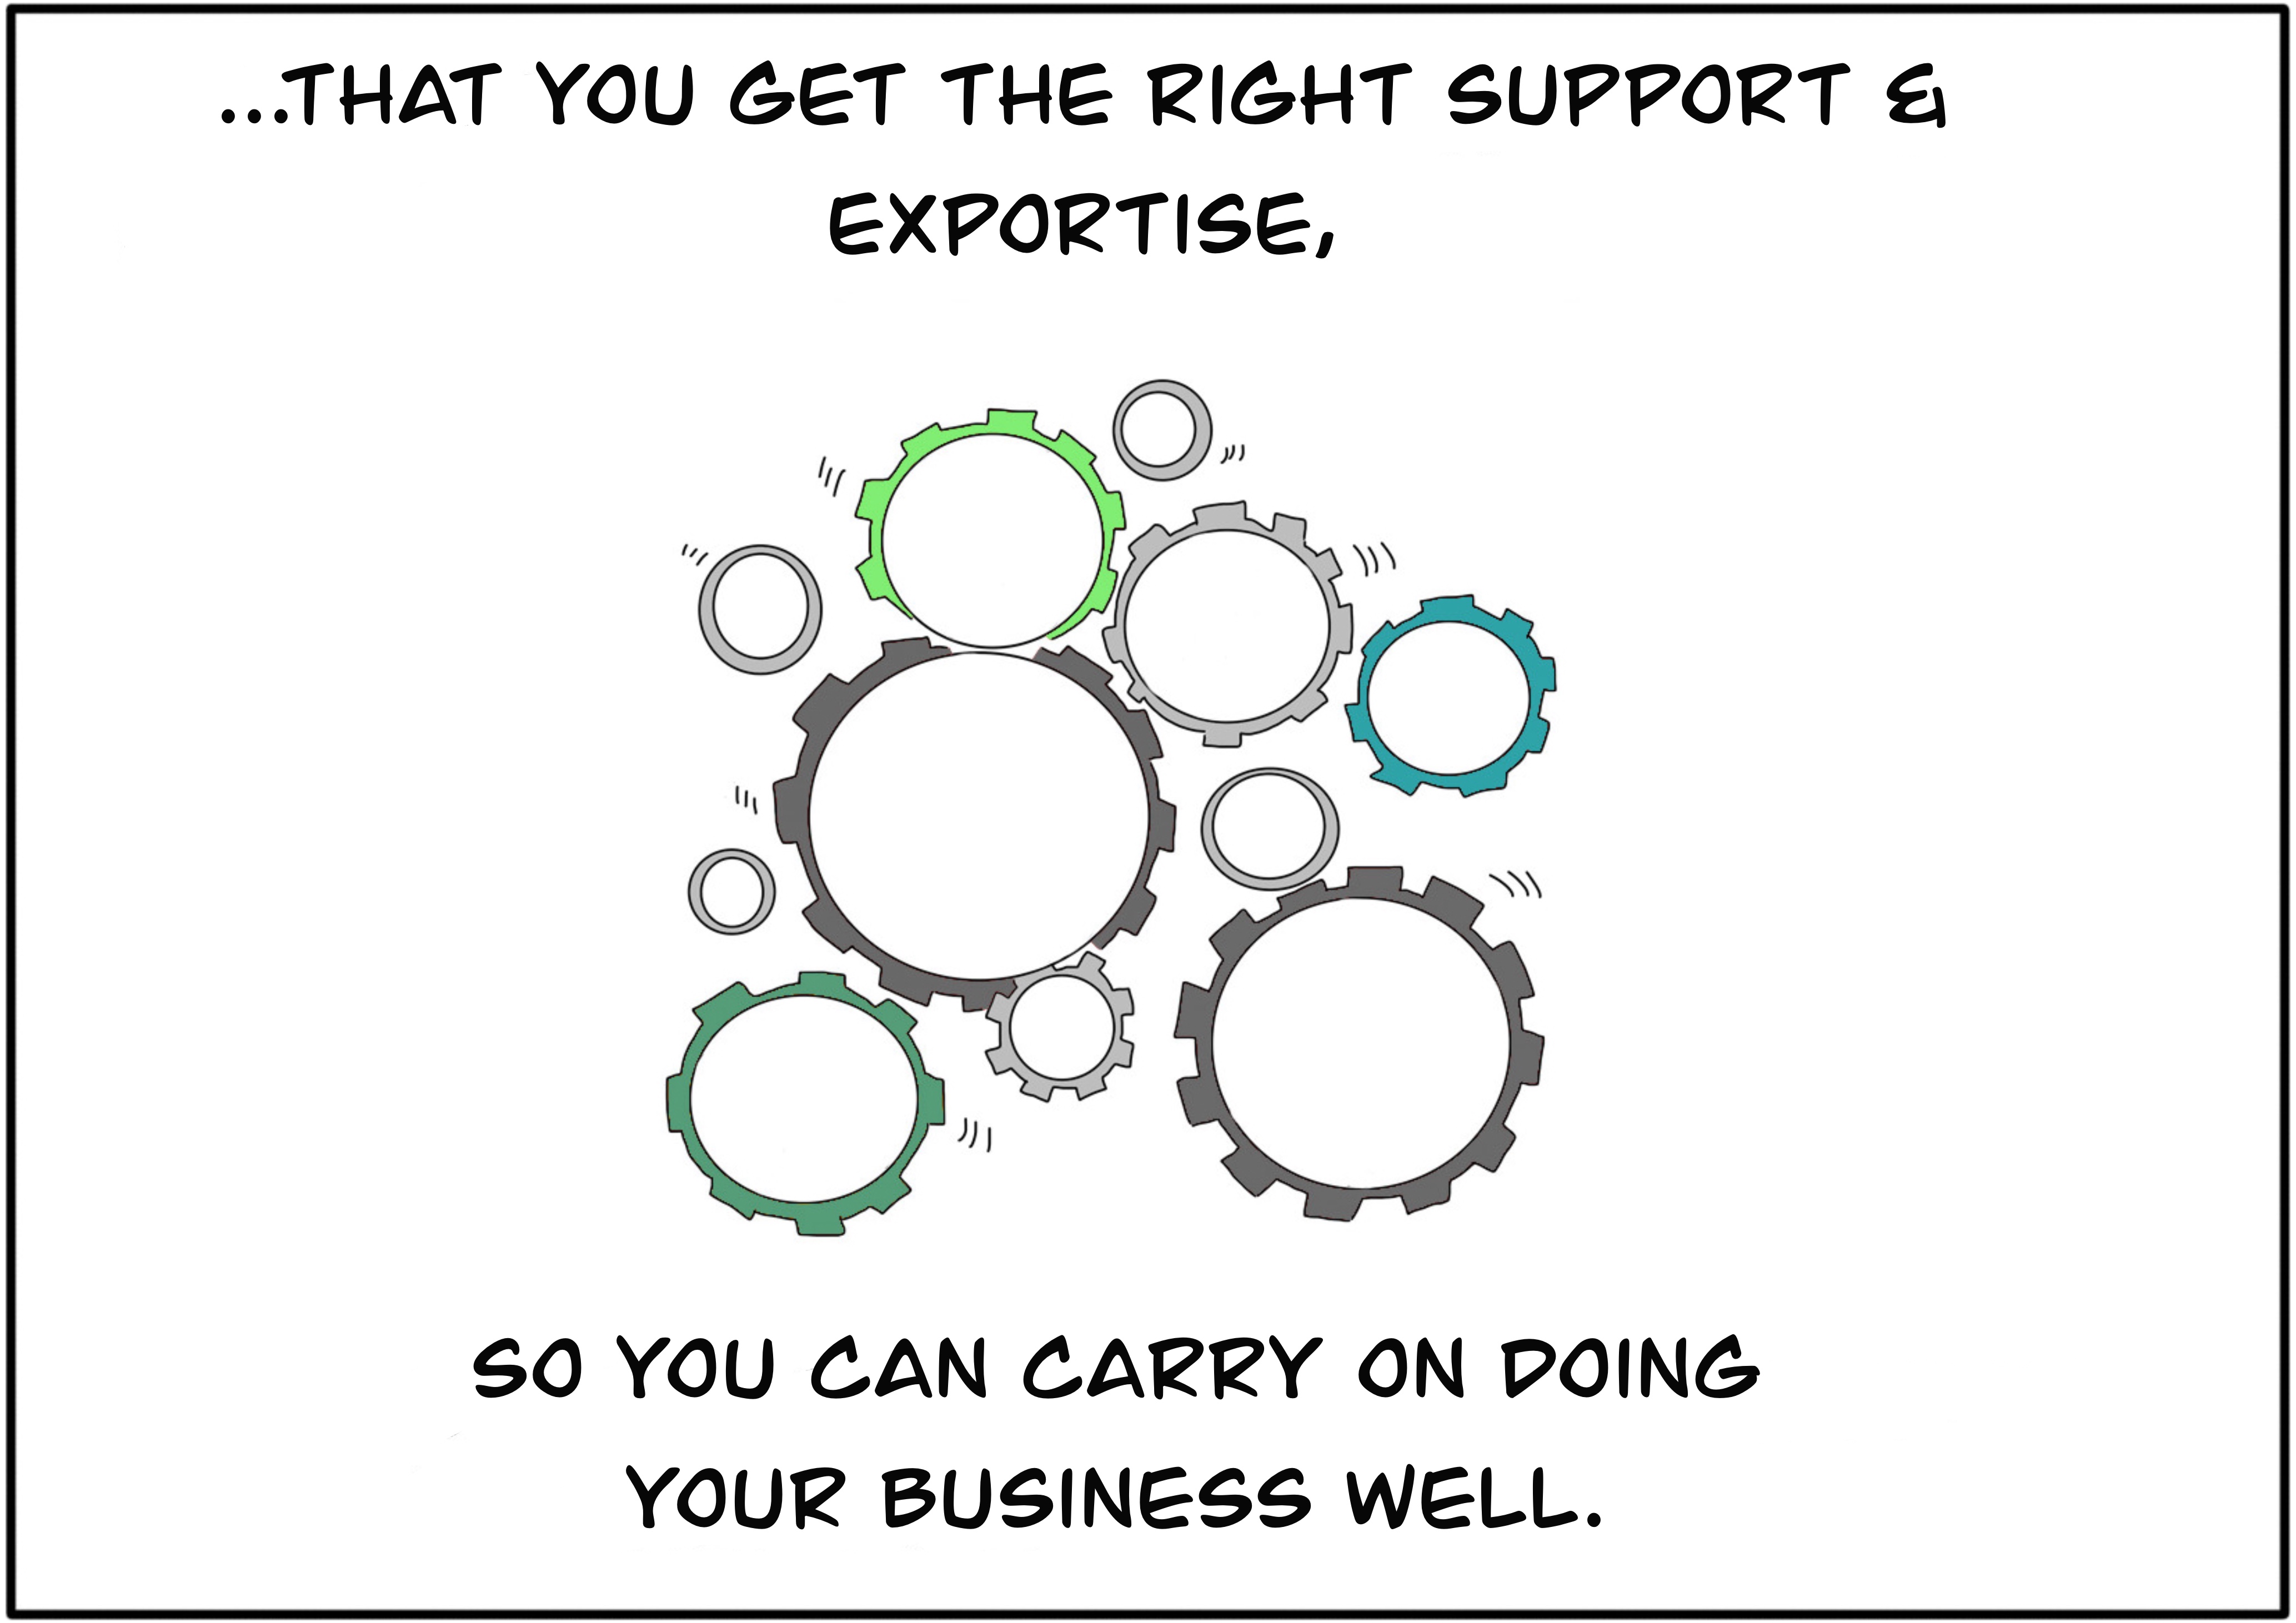 That you get the right support and expertise, so you can carry on doing your business well.